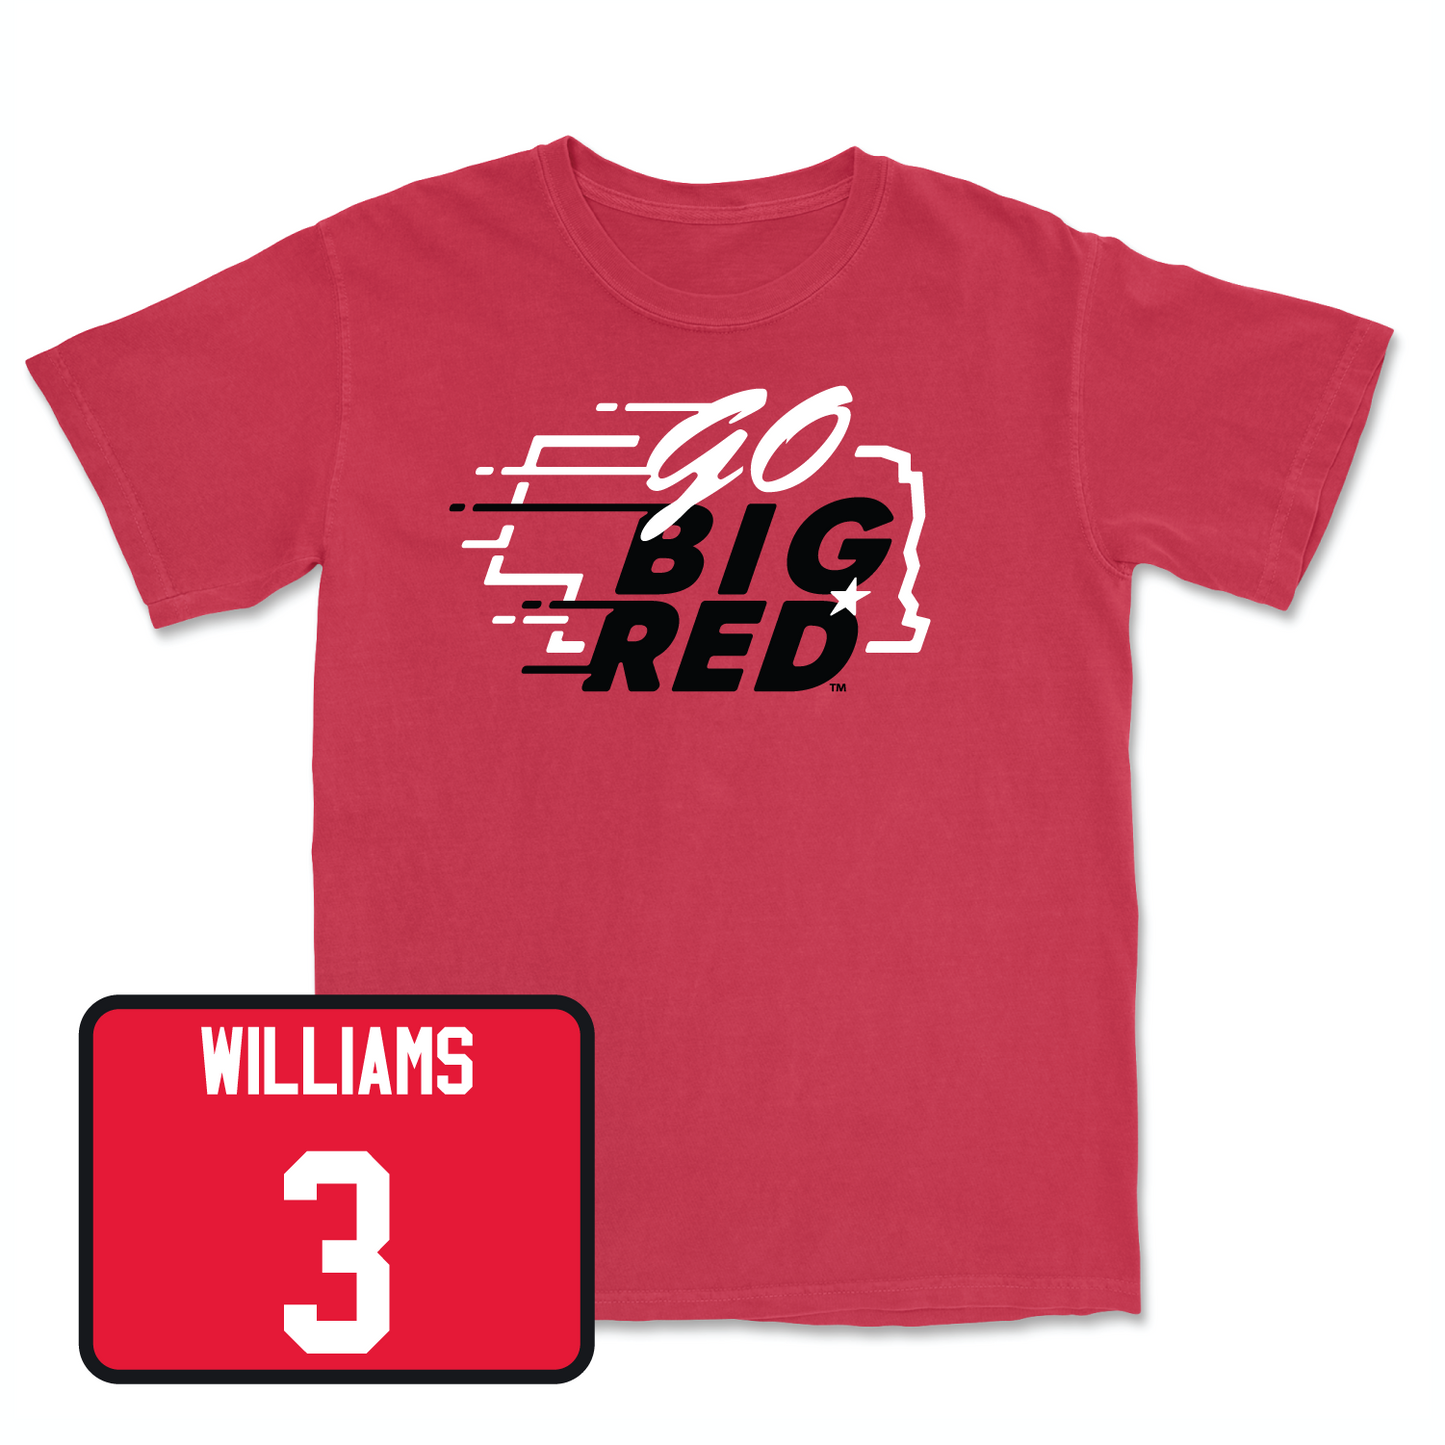 Red Men's Basketball GBR Tee X-Large / Brice Williams | #3